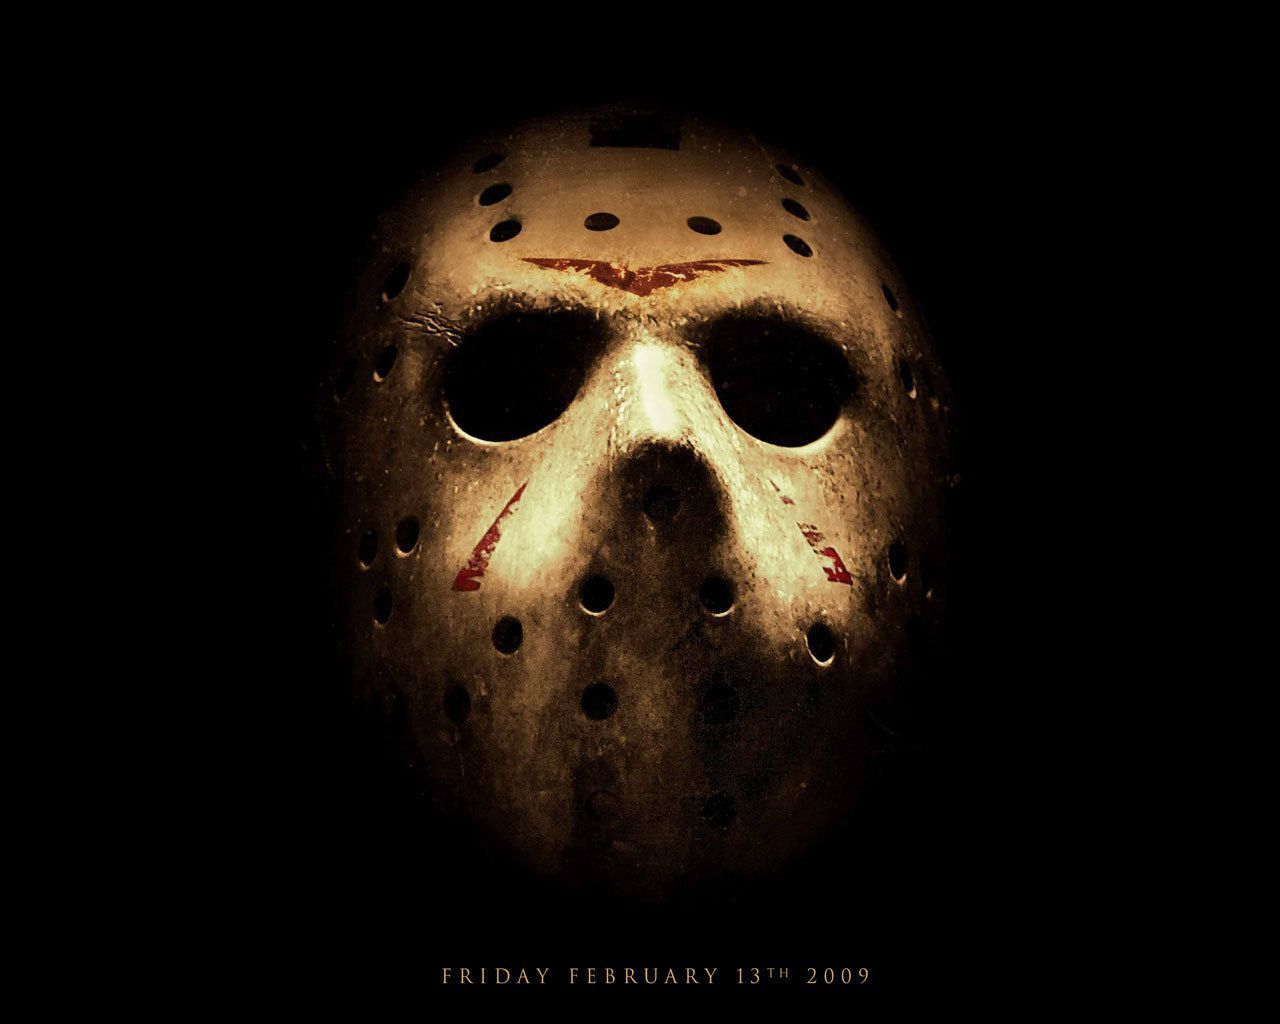 New Friday the 13th wallpaper - Horror Movies Wallpaper (2653137 ...